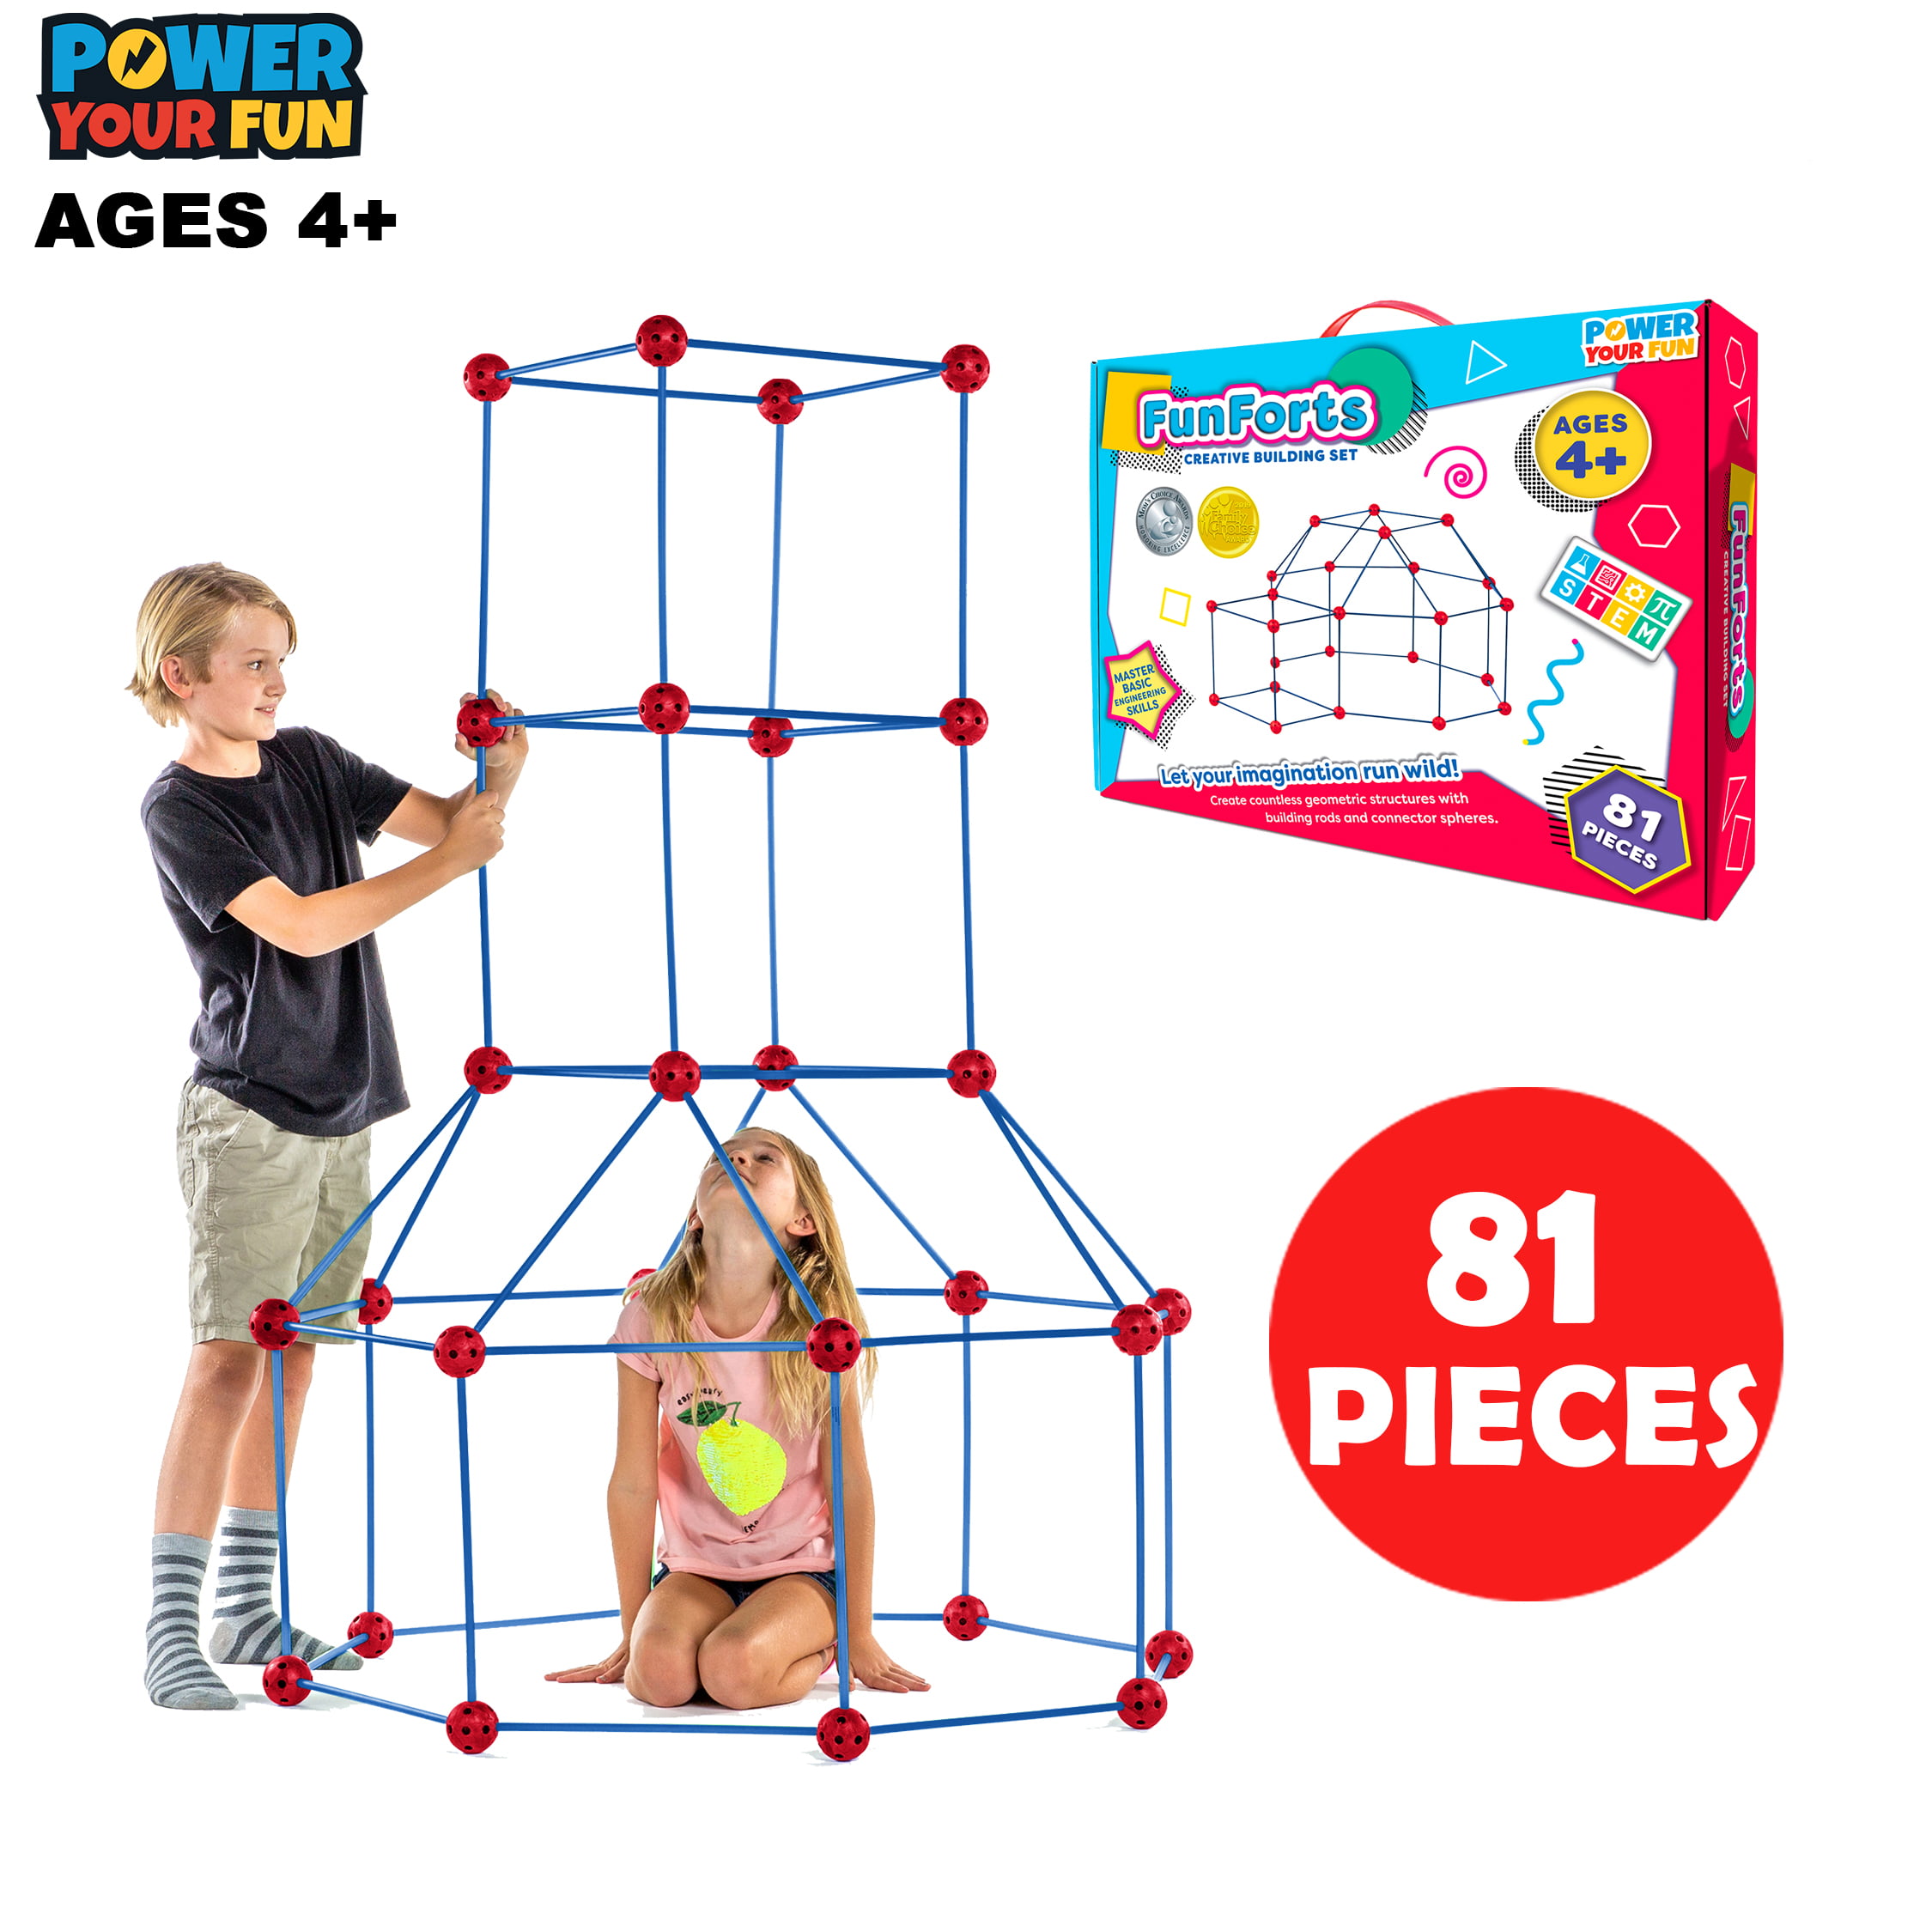 155 Pcs Ultimate Construction STEM Toys for 3 4 5 6 7 8 Years Old Creative DIY Building Play Tent Indoor Outdoor MIGWDPM Fort Building Kit for Kids Educational Learning Toy Gift for Boys Girls 